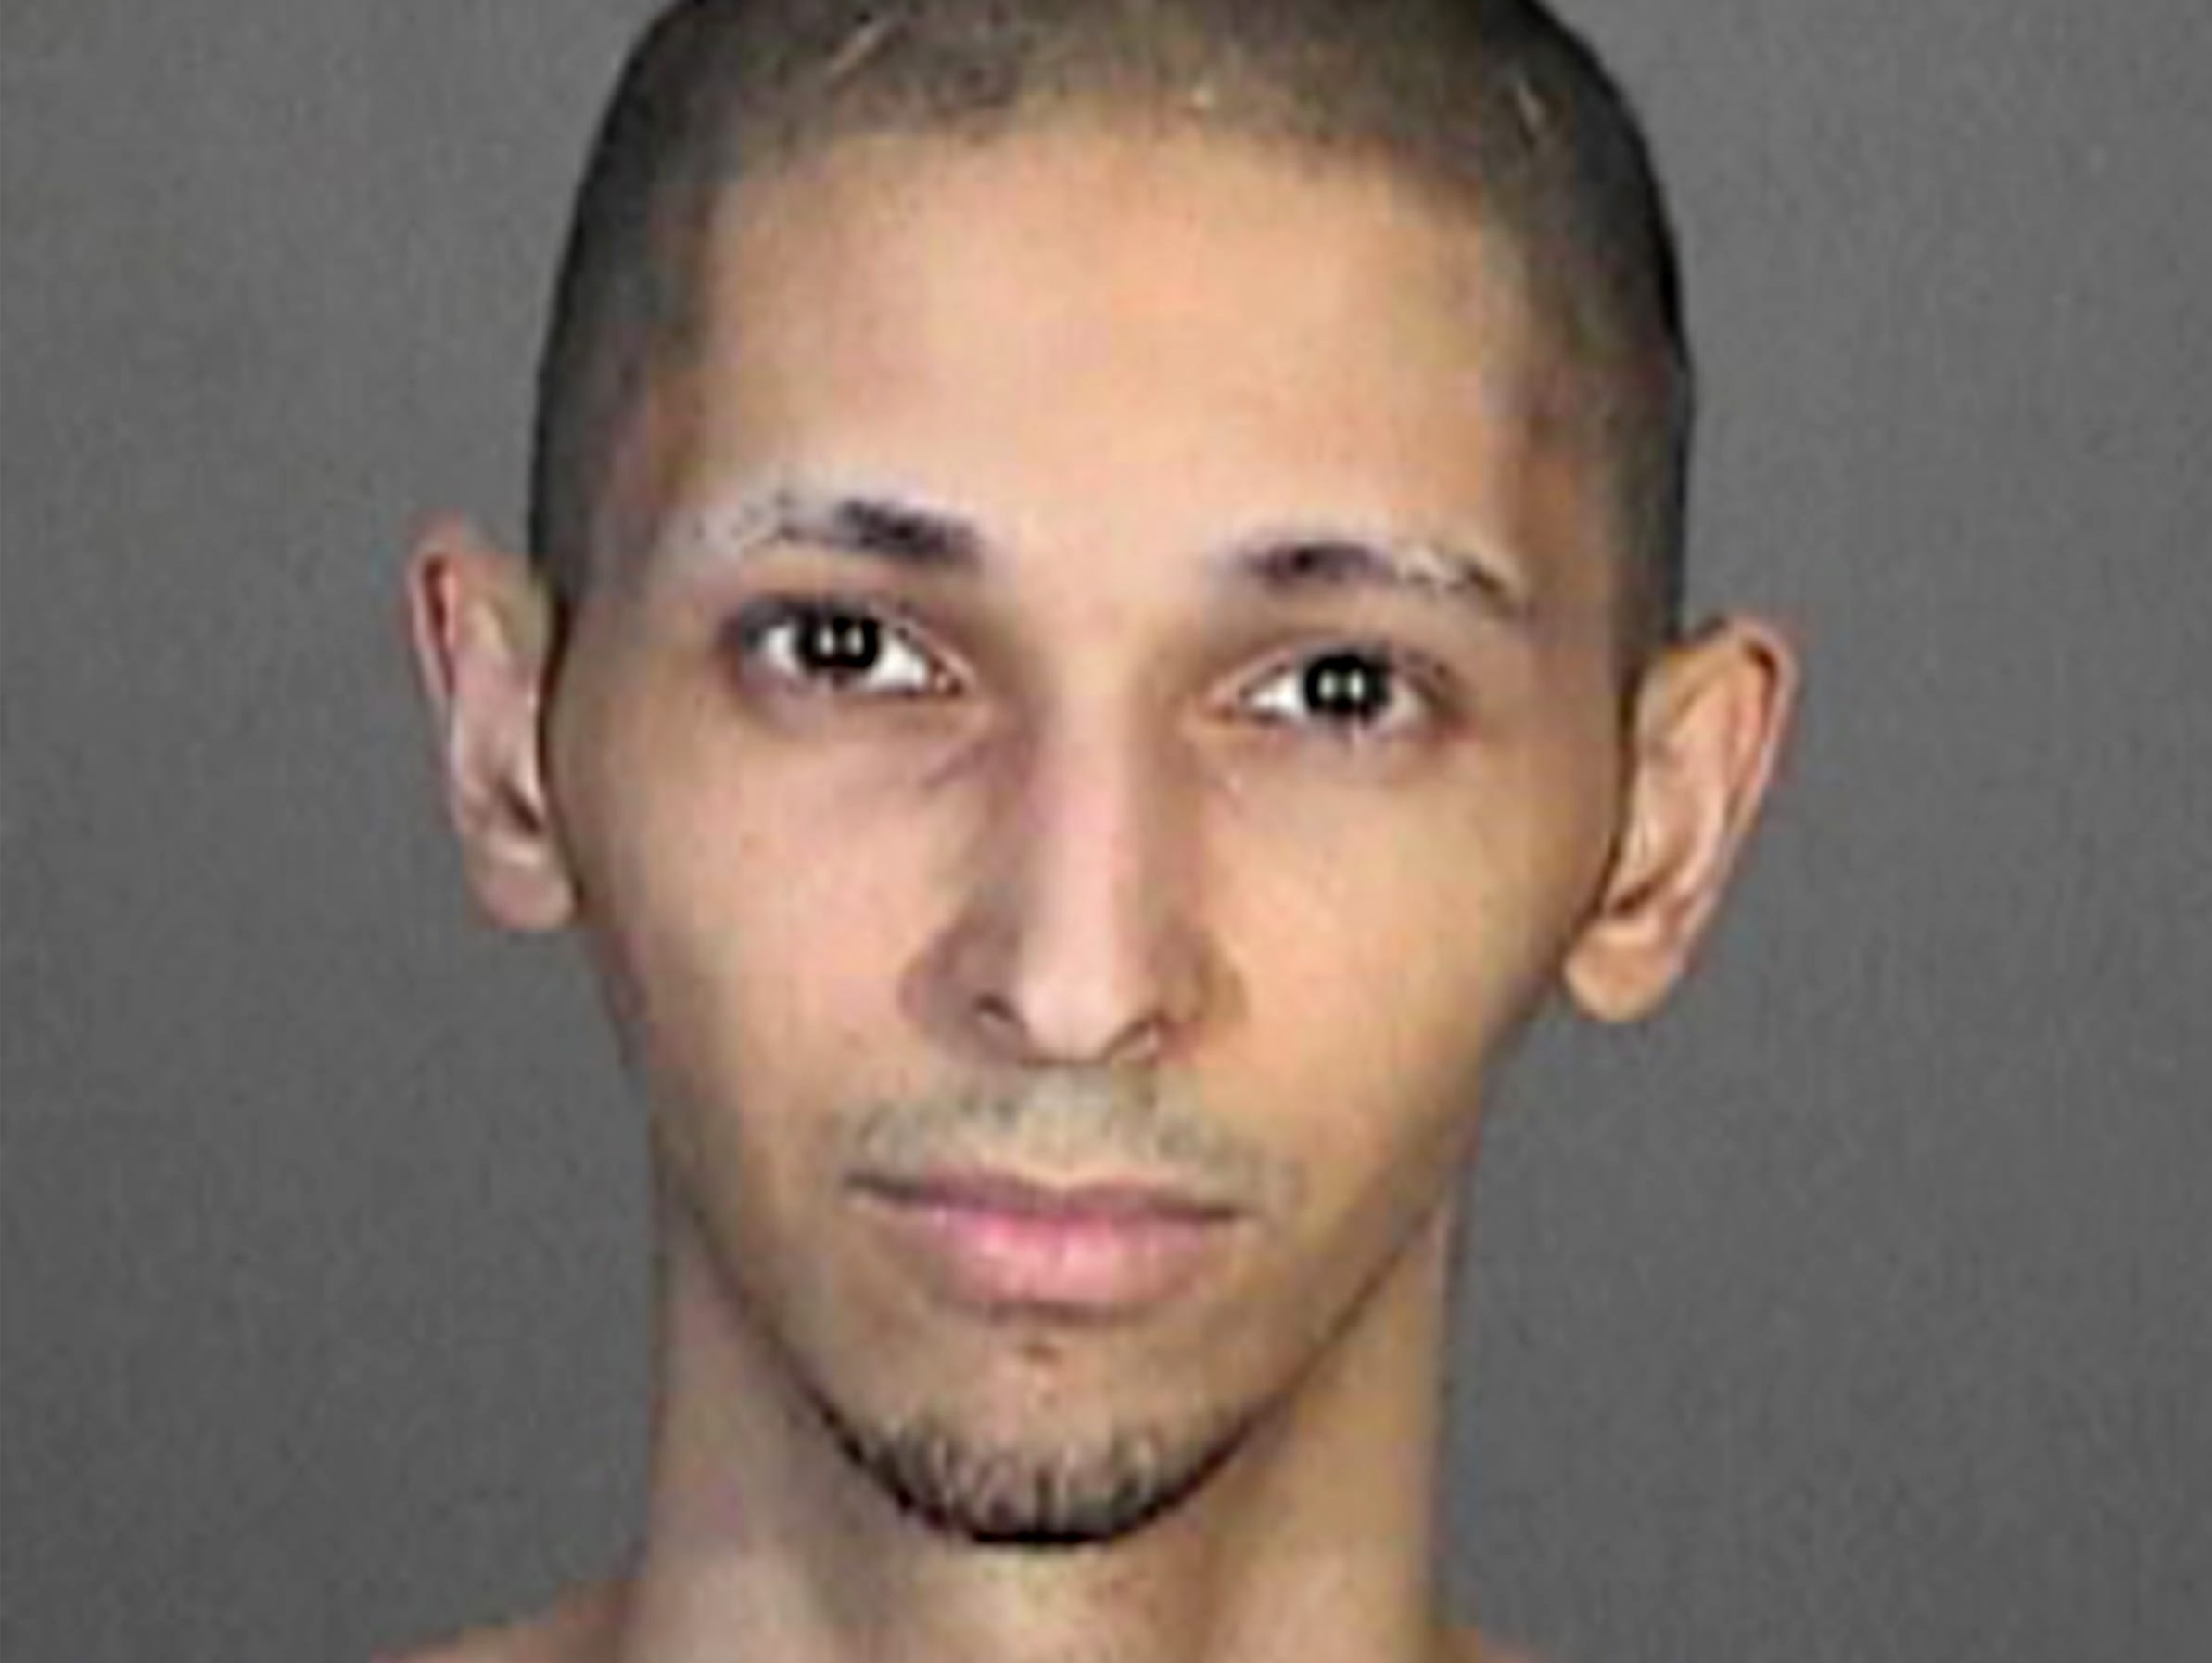 This 2015 booking photo released by the Glendale, Calif., Police Department shows Tyler Raj Barriss. The Los Angeles Police Department confirms it arrested Barriss Friday, Dec. 29, 2017, in connection with a deadly 'swatting' call in Wichita, Kan., T